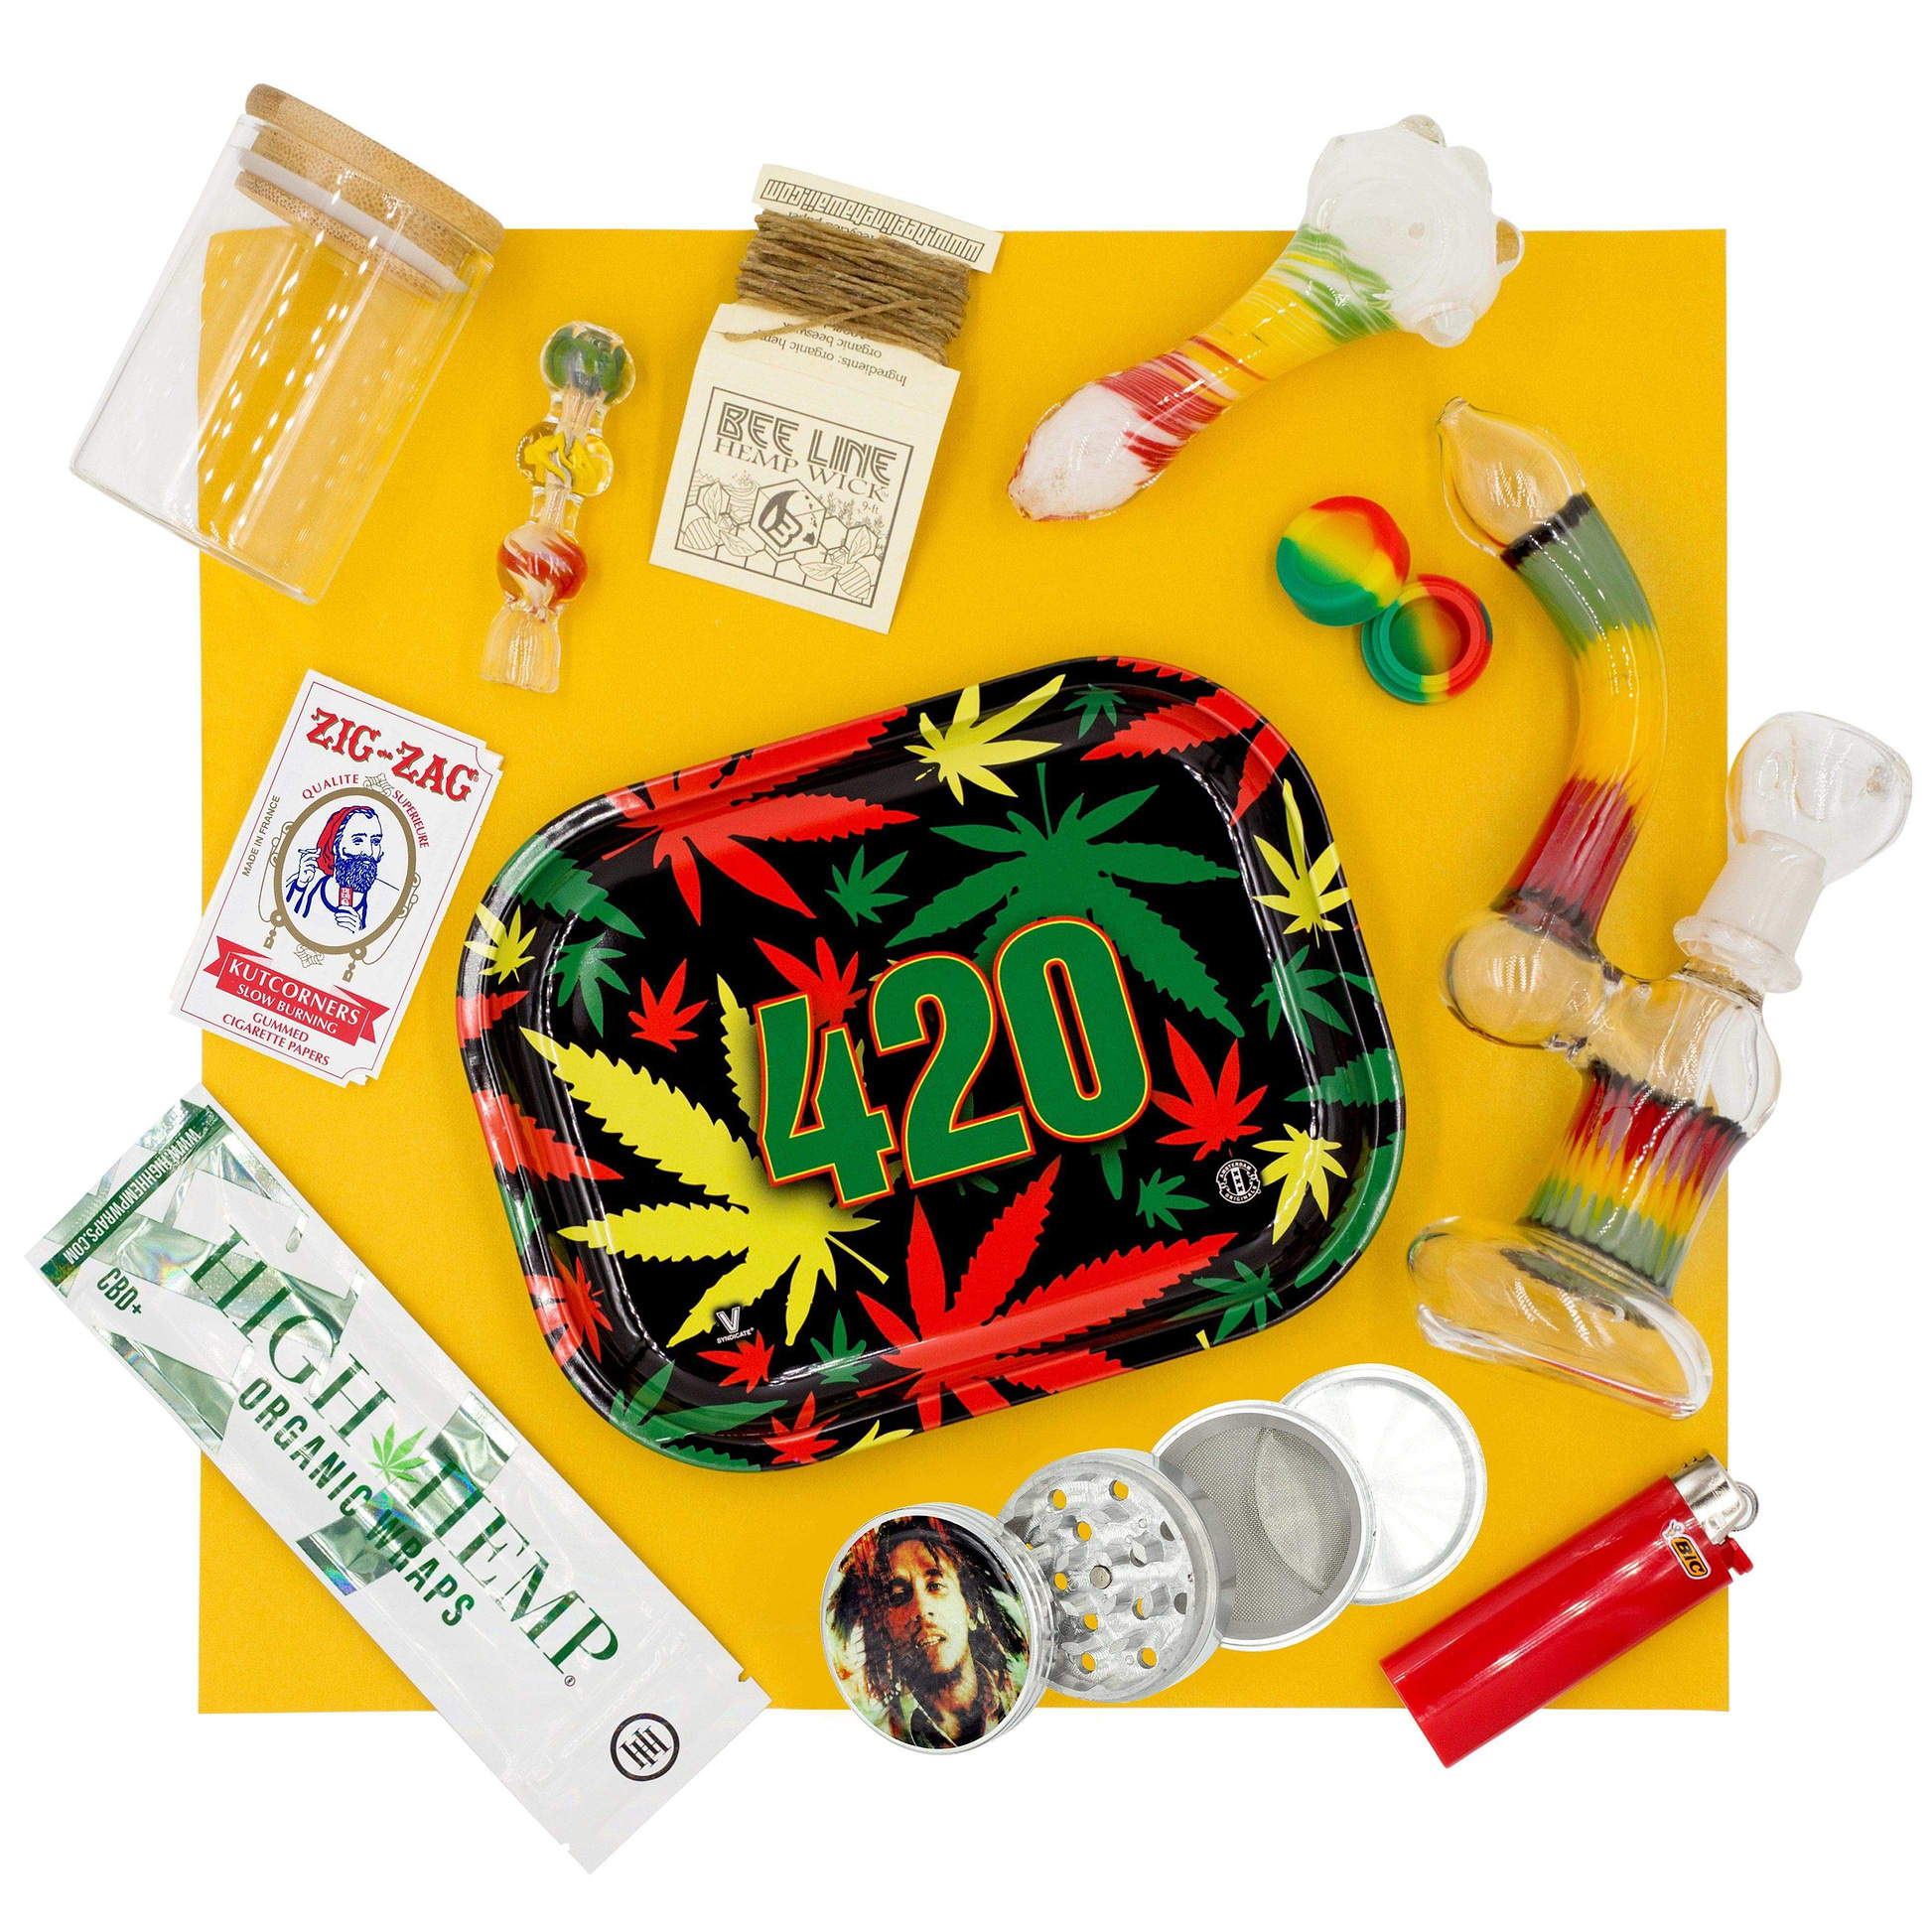 Set of rasta bong, herb bowl, 4-inch pipe, chillum, 420 tray, grinder, jar, container, wraps, zigzag pack and Bic lighter